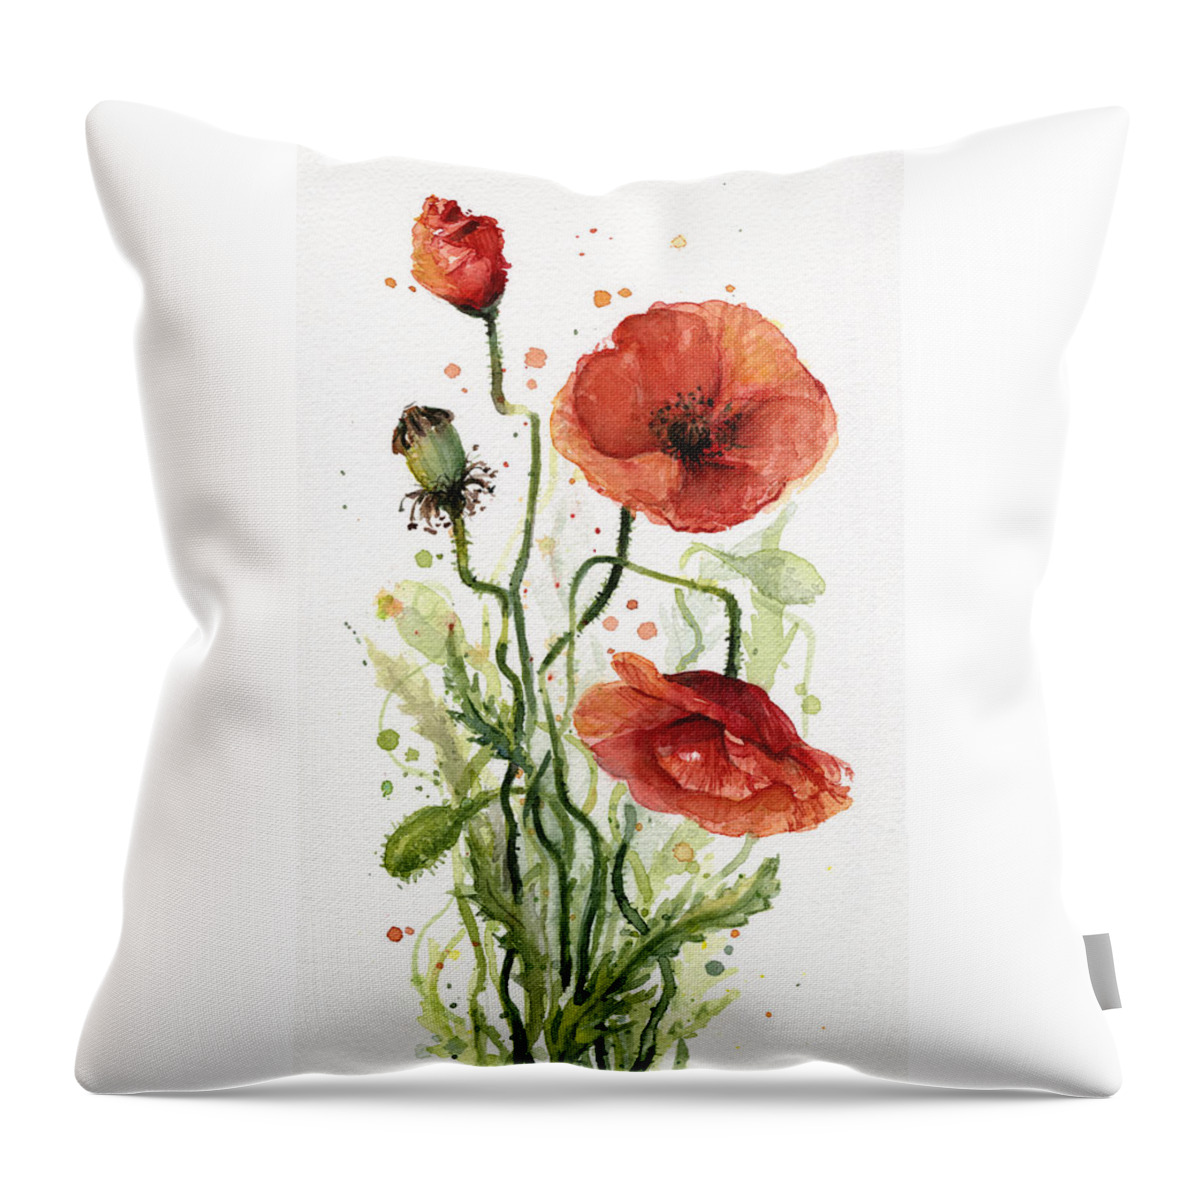 Red Poppy Throw Pillow featuring the painting Red Poppies Watercolor by Olga Shvartsur